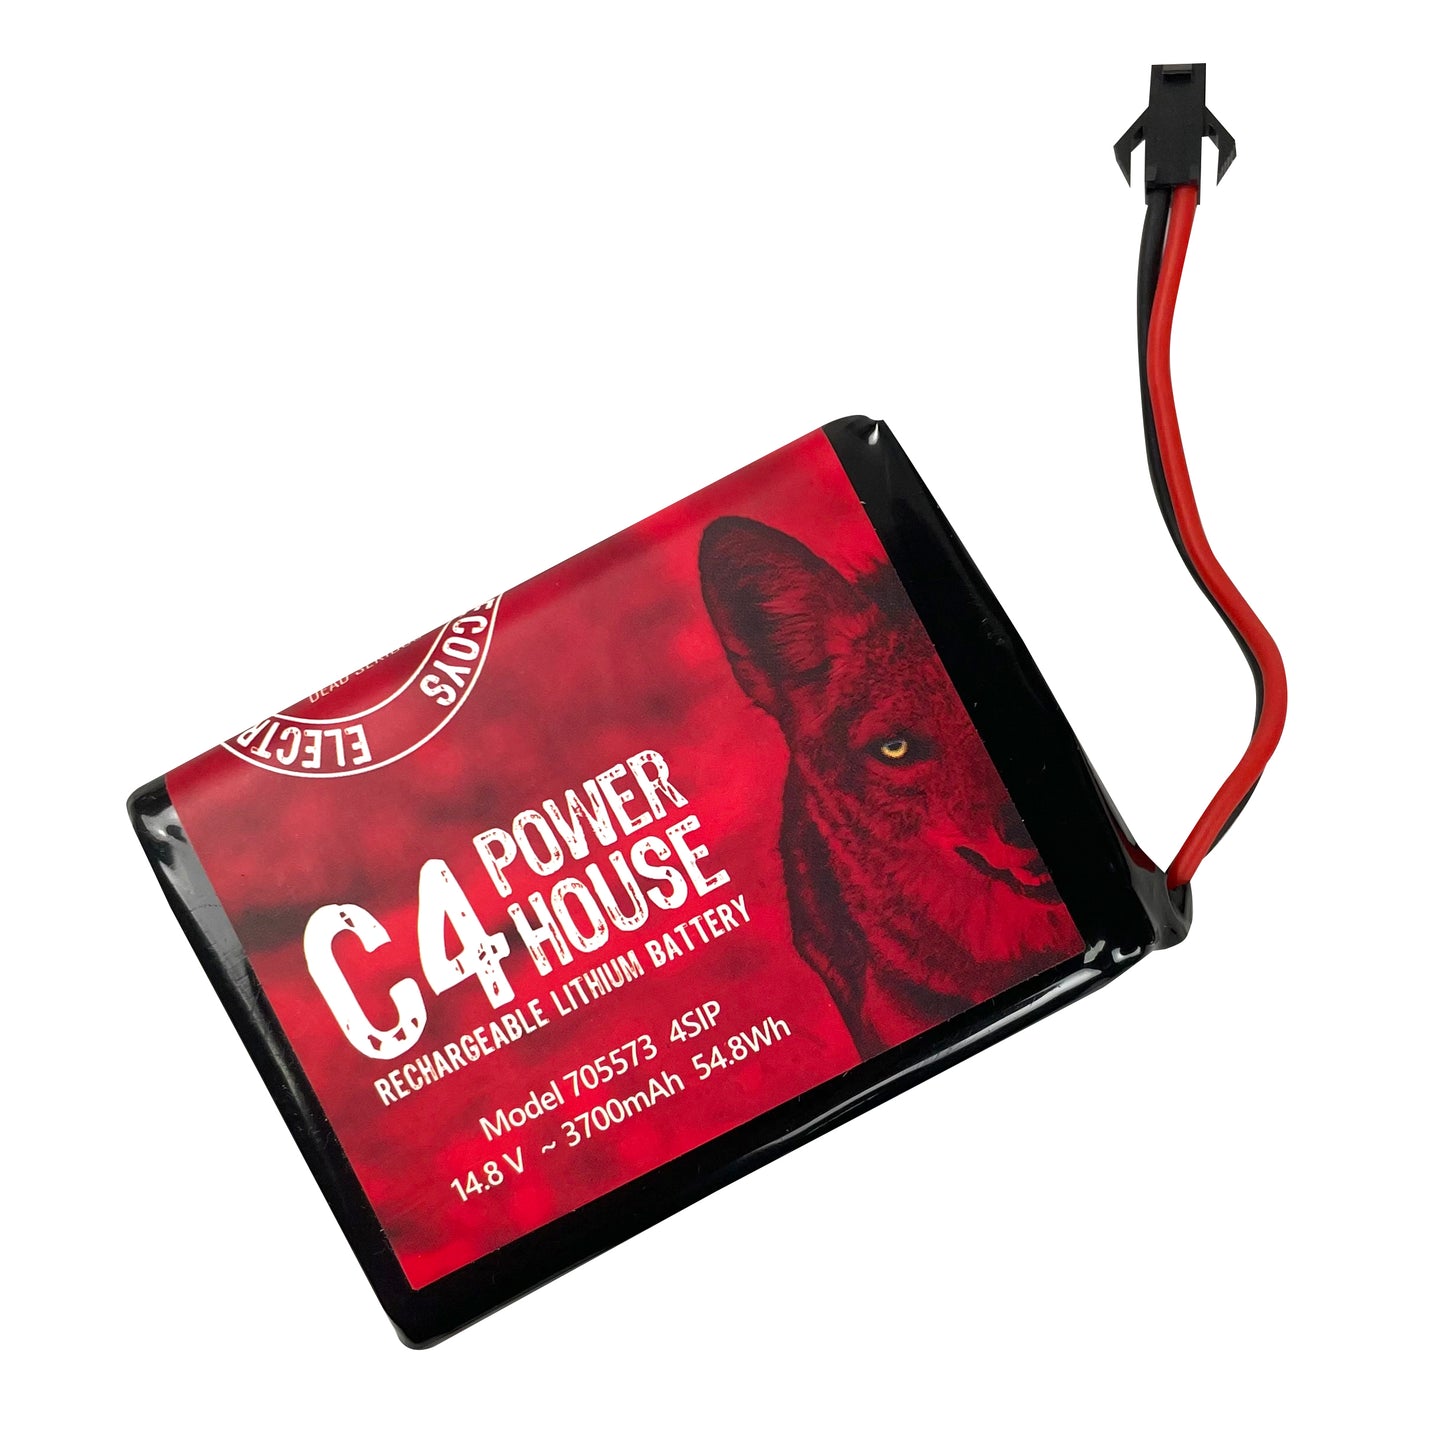 C4 Power House Rechargeable Lithium Battery Pack